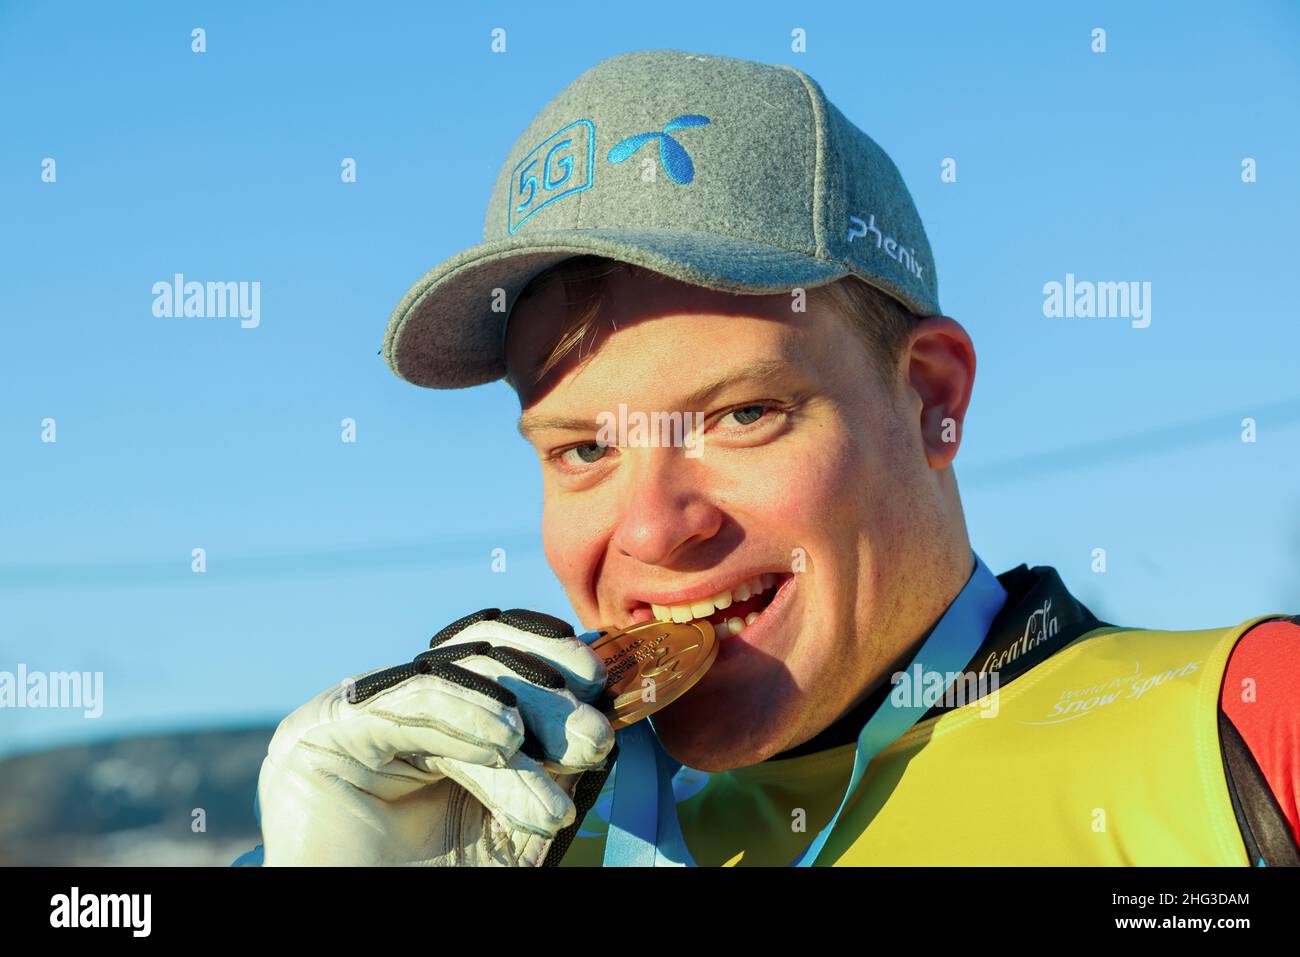 https://c8.alamy.com/comp/2HG3DAM/hafjell-20220114jesper-saltvik-pedersen-from-norway-with-the-gold-medal-after-downhill-sitting-for-men-during-the-world-para-snow-sports-2022-on-hafjell-photo-geir-olsen-ntb-2HG3DAM.jpg